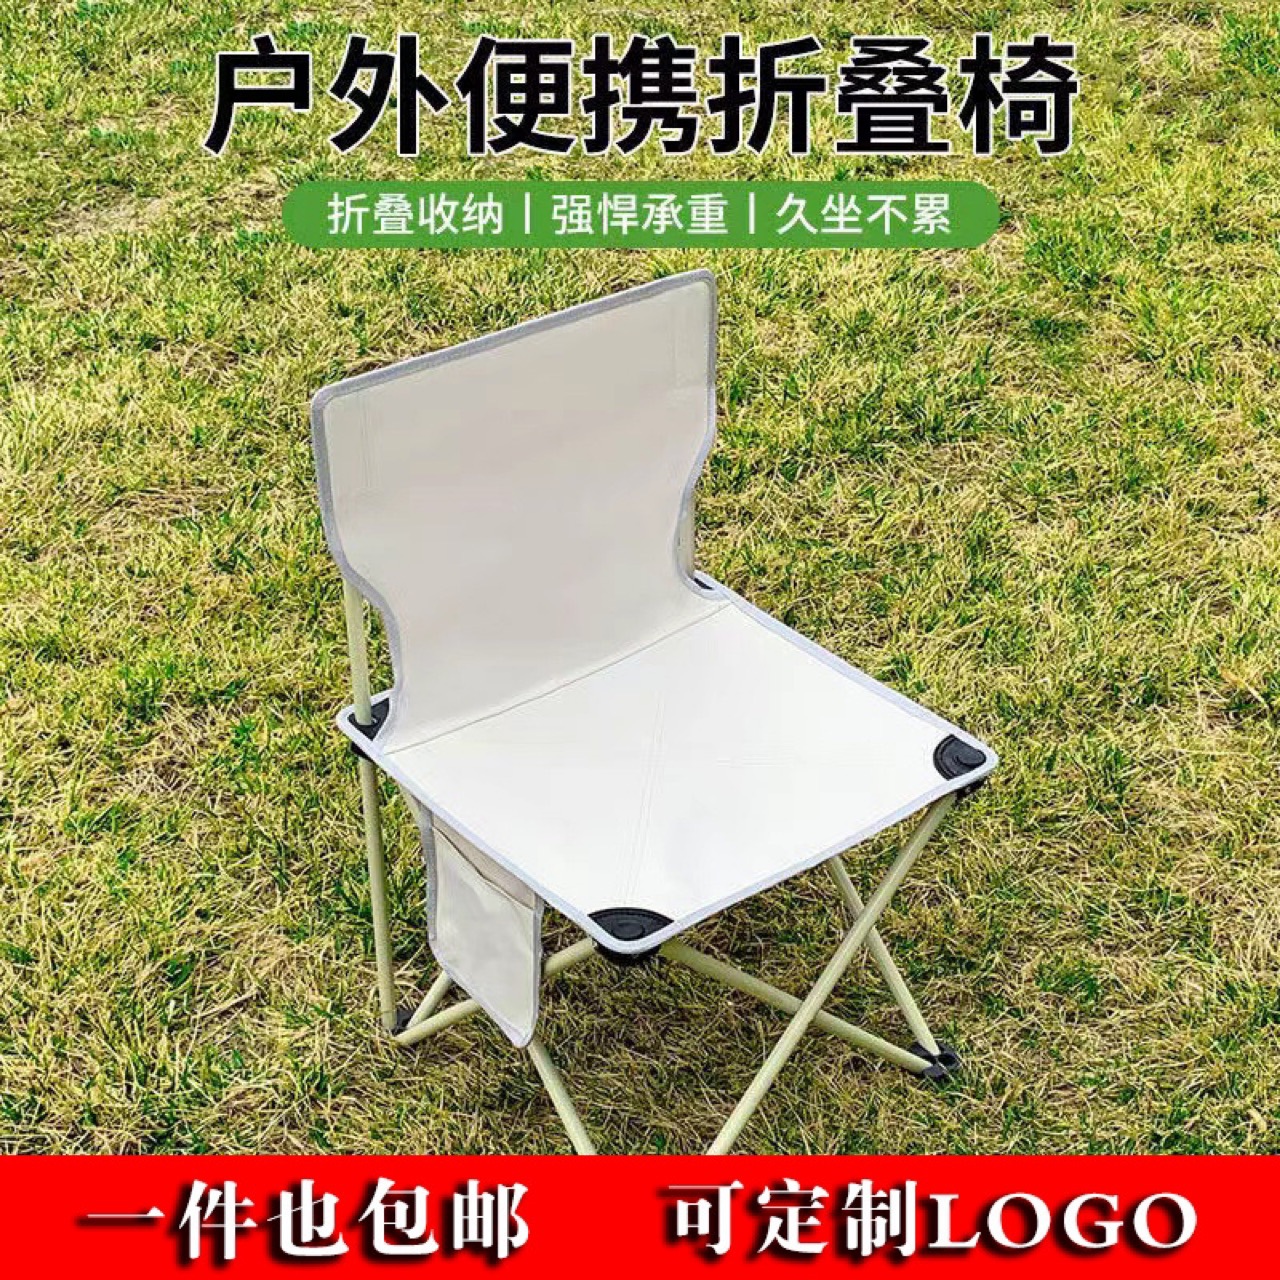 Outdoor Folding Chair Convenient Simple Camping Fishing Picnic Art Painting Stool Leisure Travel Life Essential Supplies